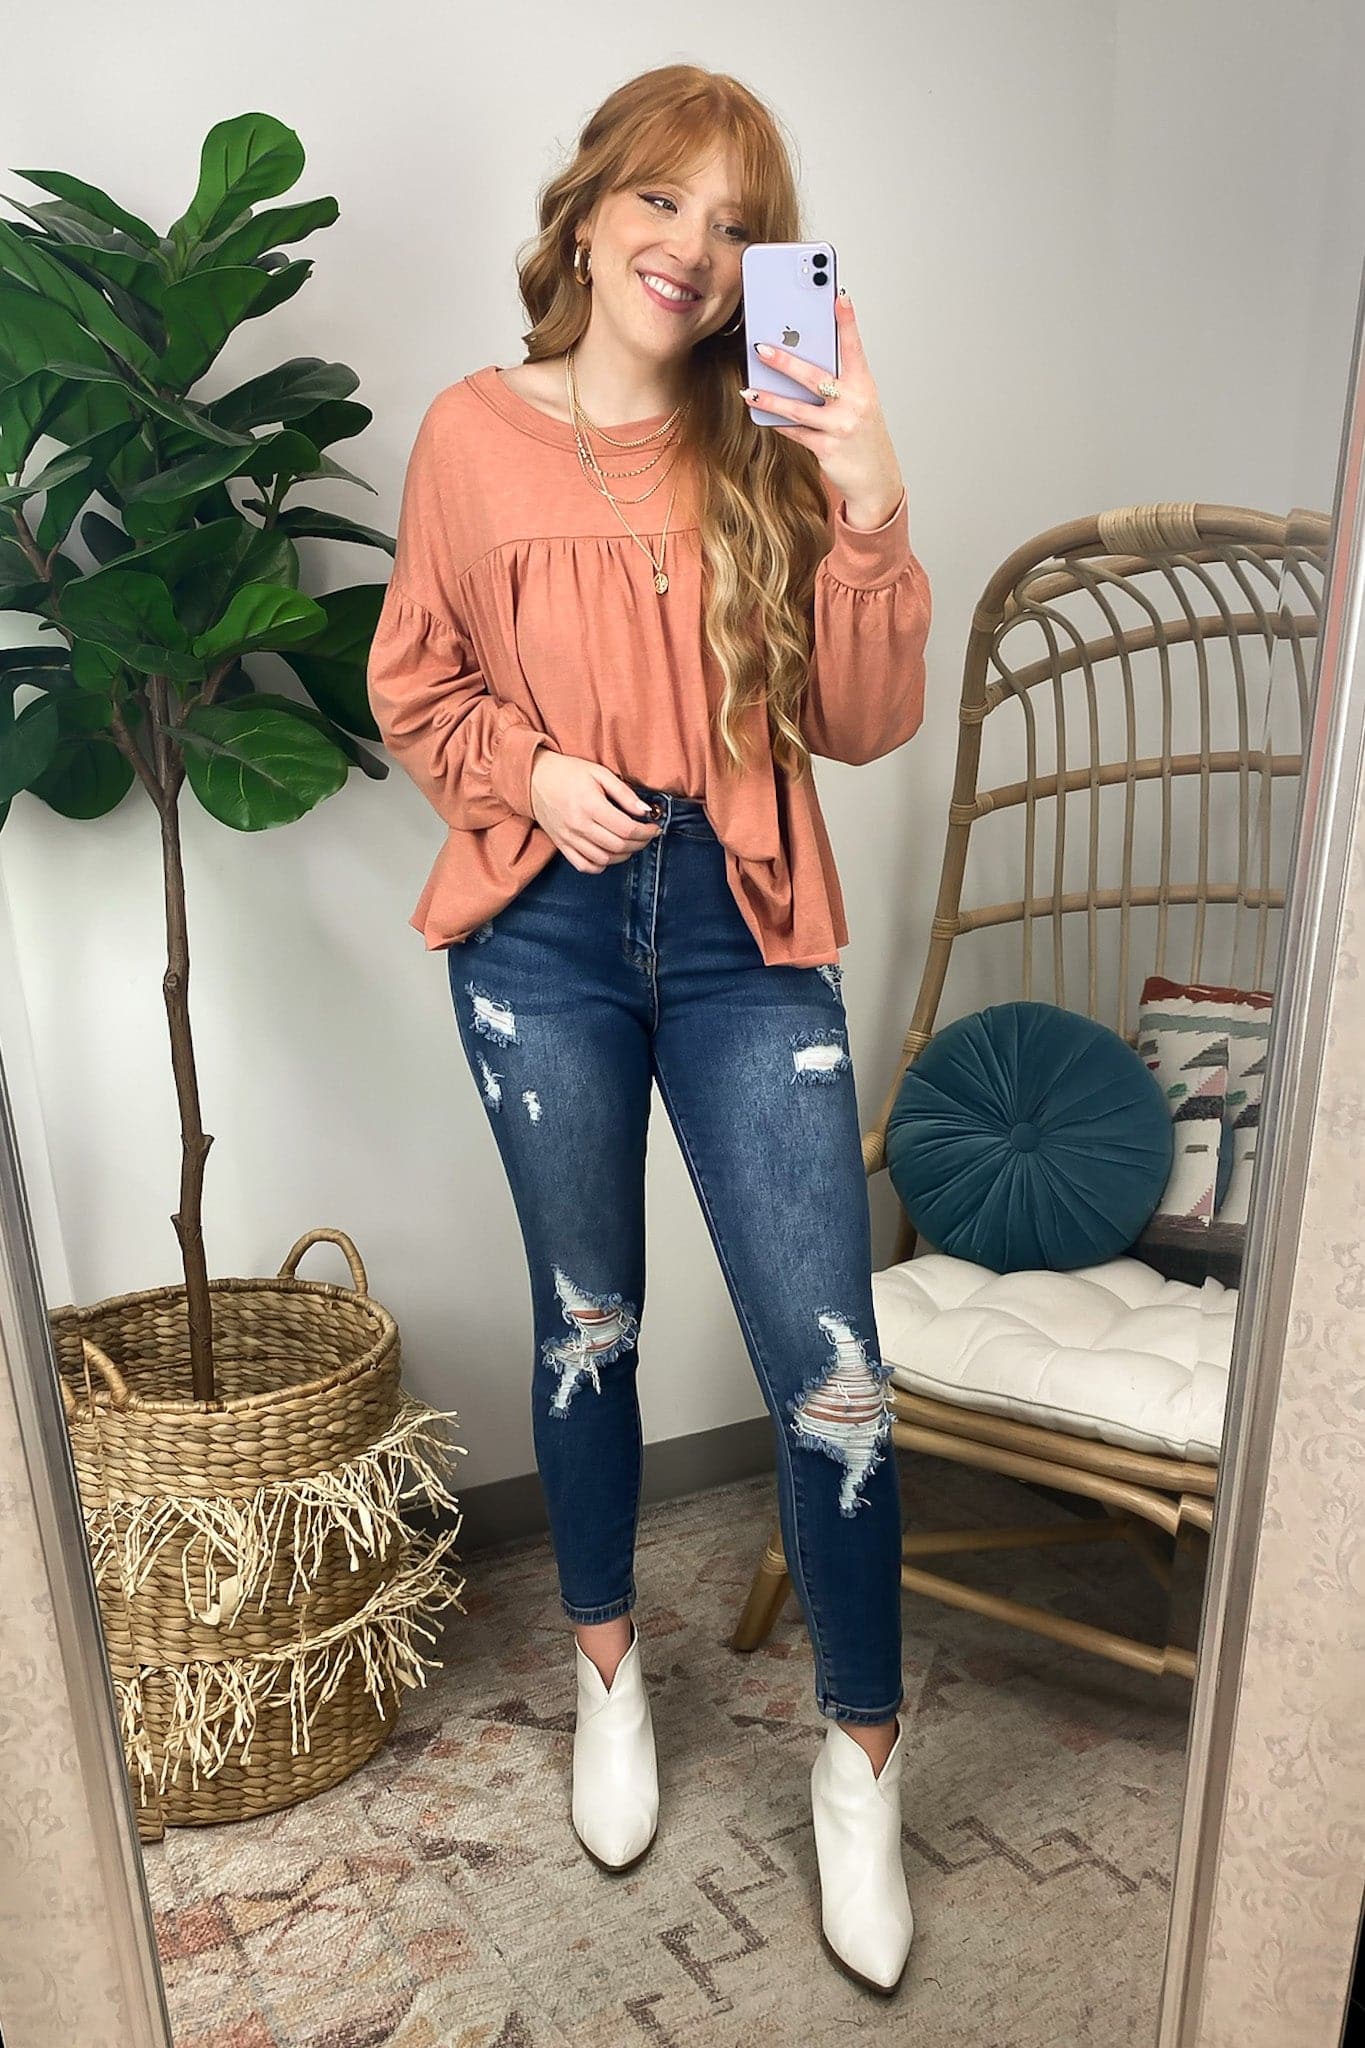  Sirenah Long Sleeve Pleated Flowy Top - FINAL SALE - Madison and Mallory